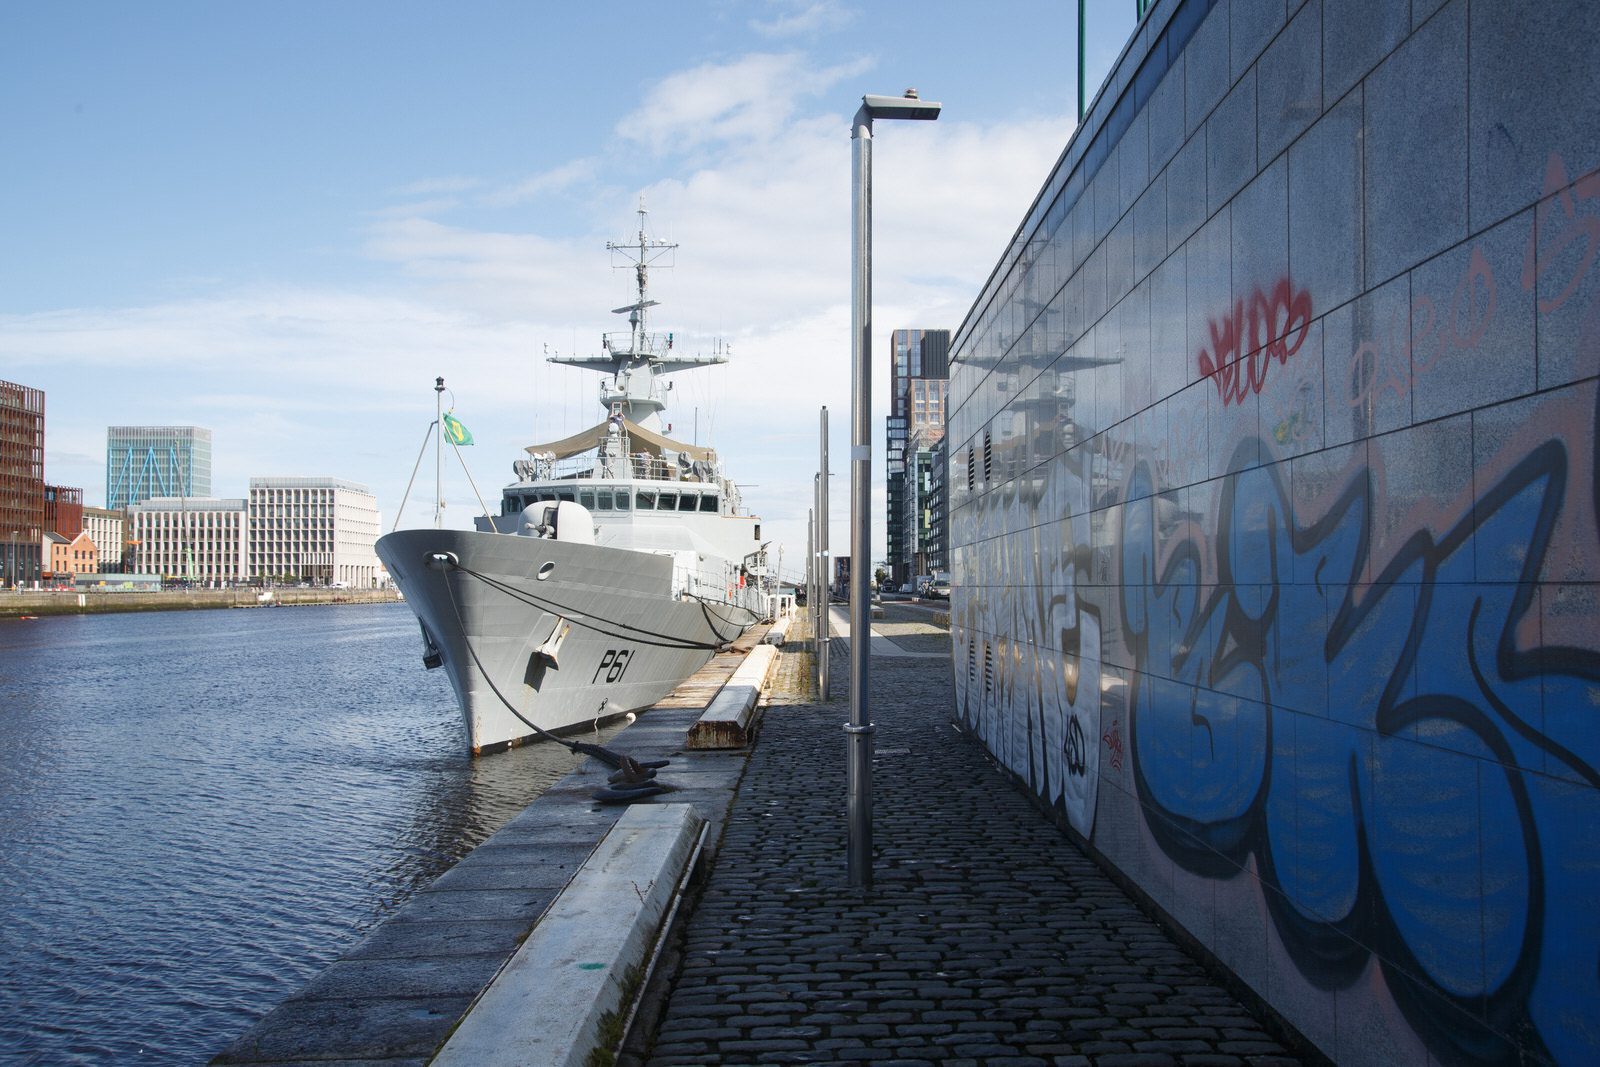 THE P61 IS AN IRISH NAVY VESSEL [I WAS HOPING TO PHOTOGRAPH THE USS MESA VERDE] 010